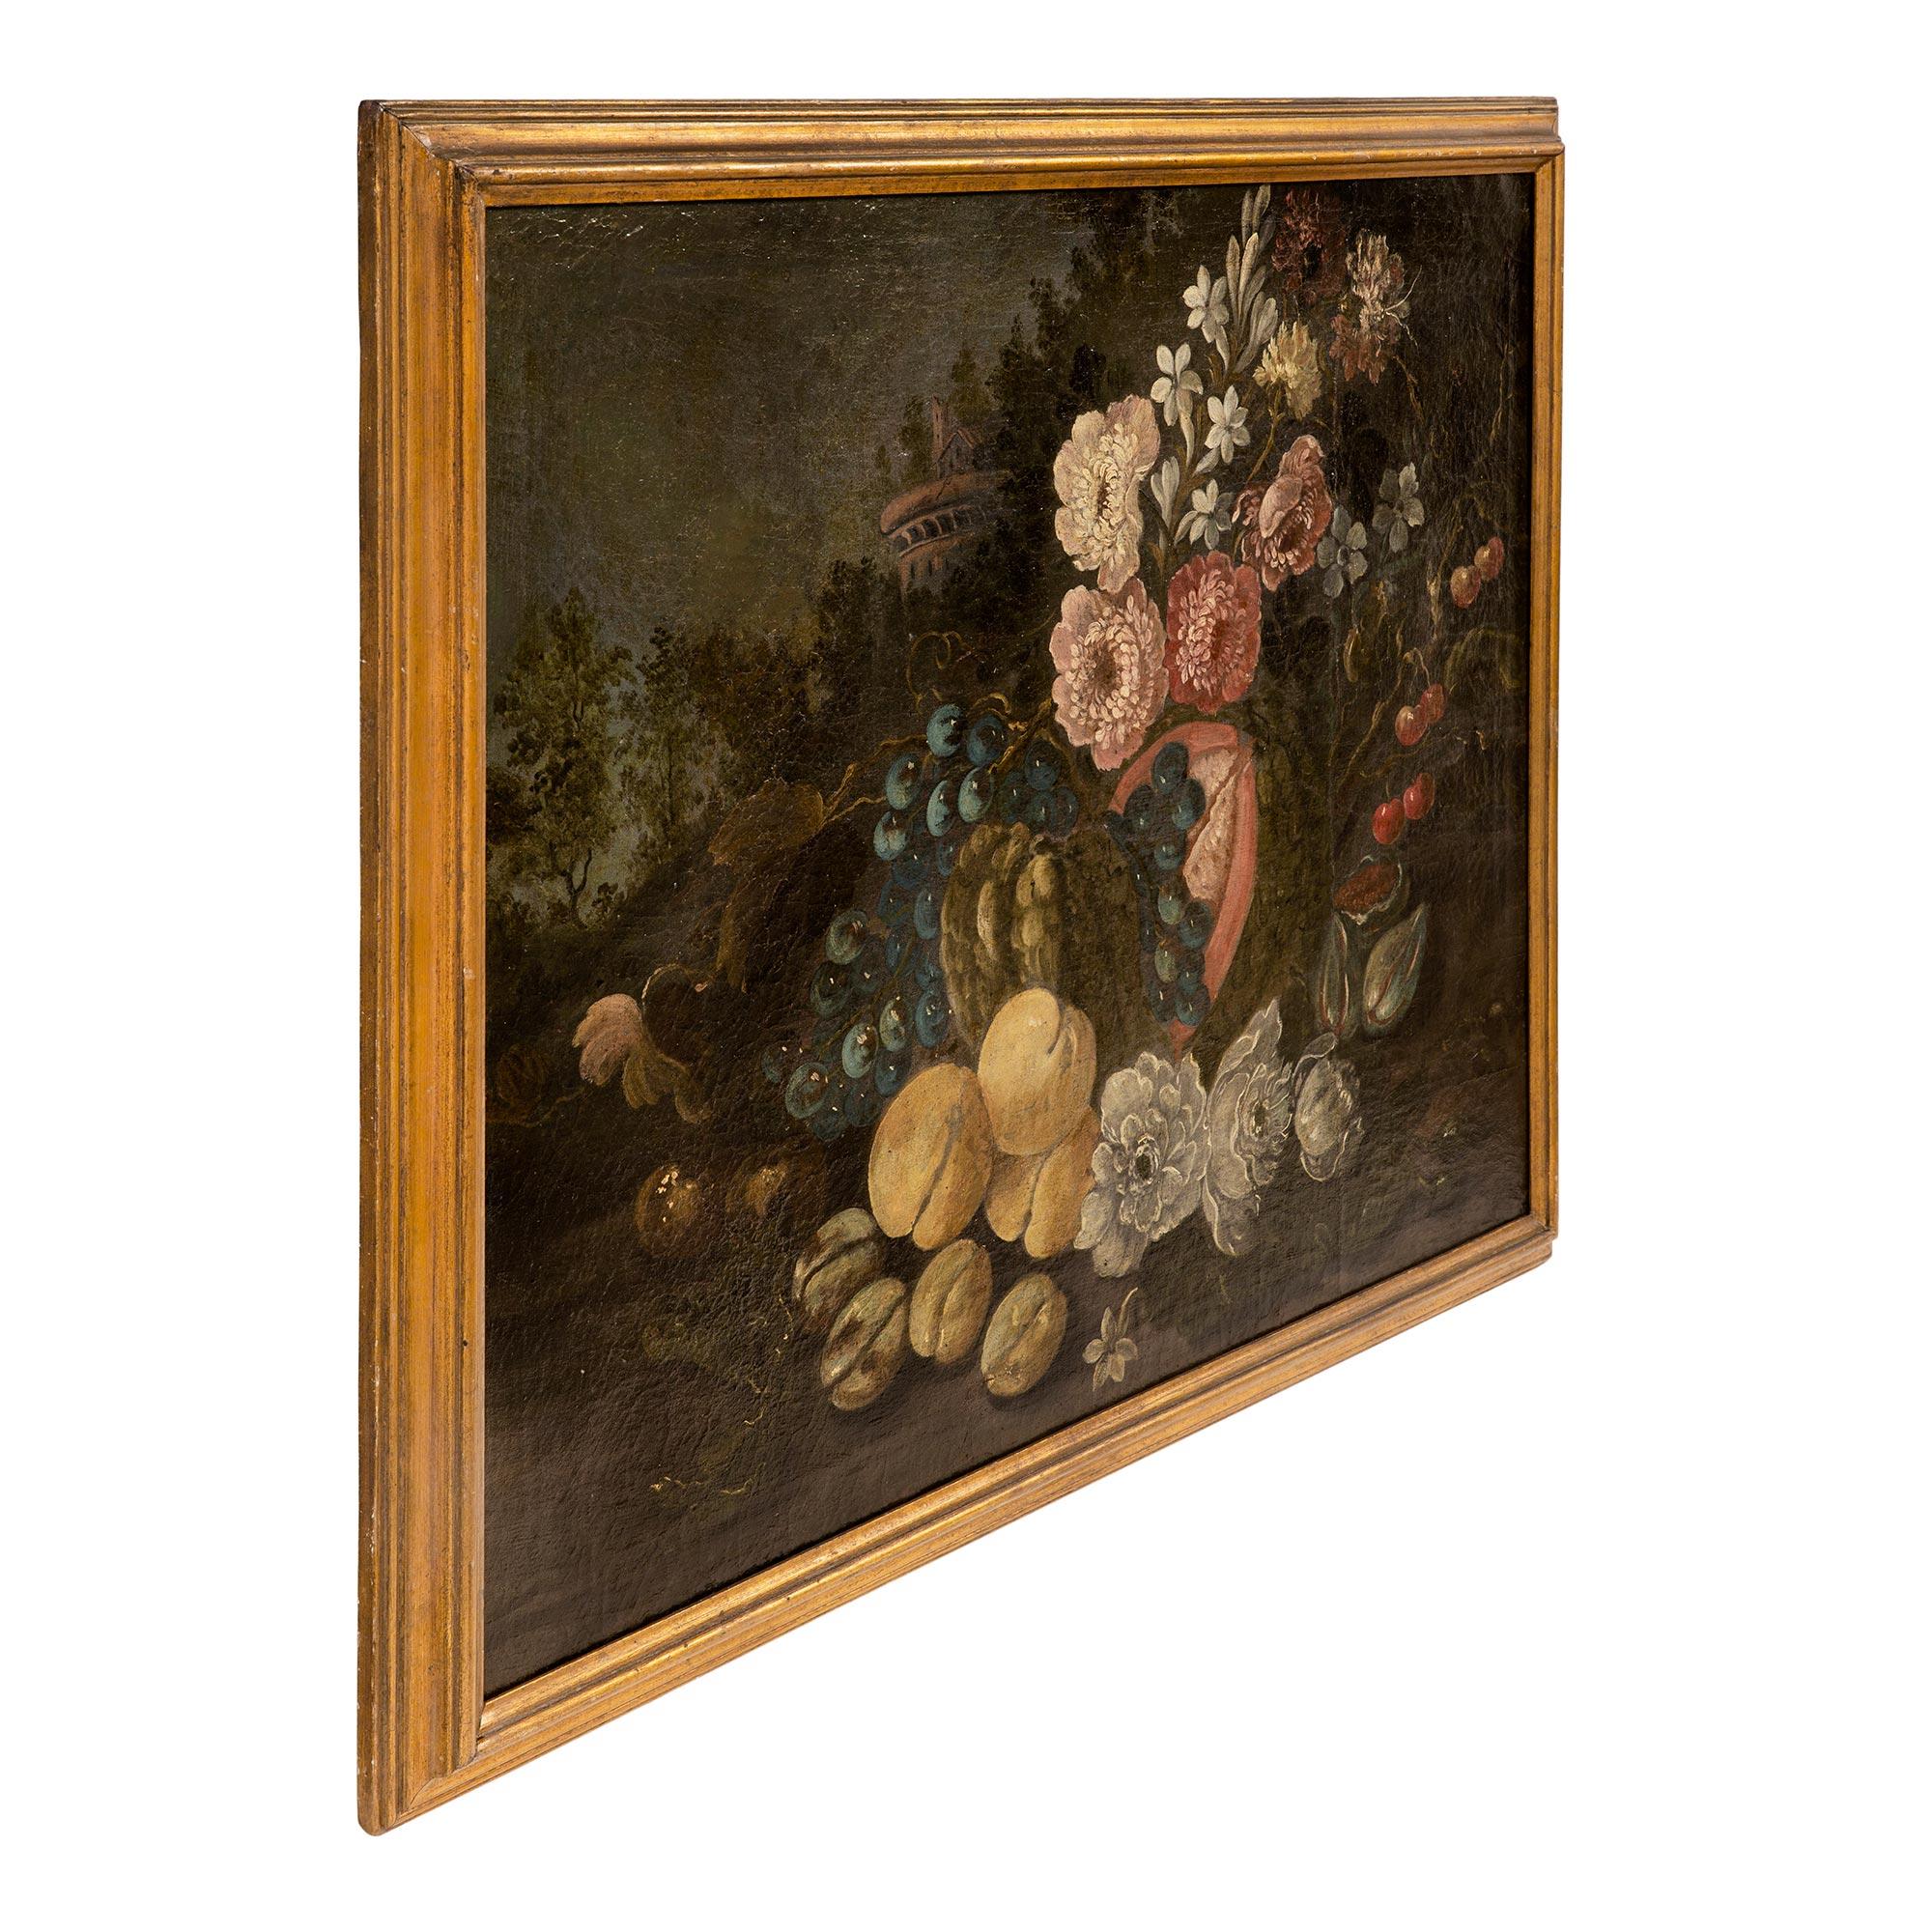 A beautiful Italian 18th Century Louis XVI period oil on canvas still life painting. The painting depicts a lovely colorful abundance of wonderfully executed fruit and flowers set outside in the beautiful Italian countryside with an elegant villa in